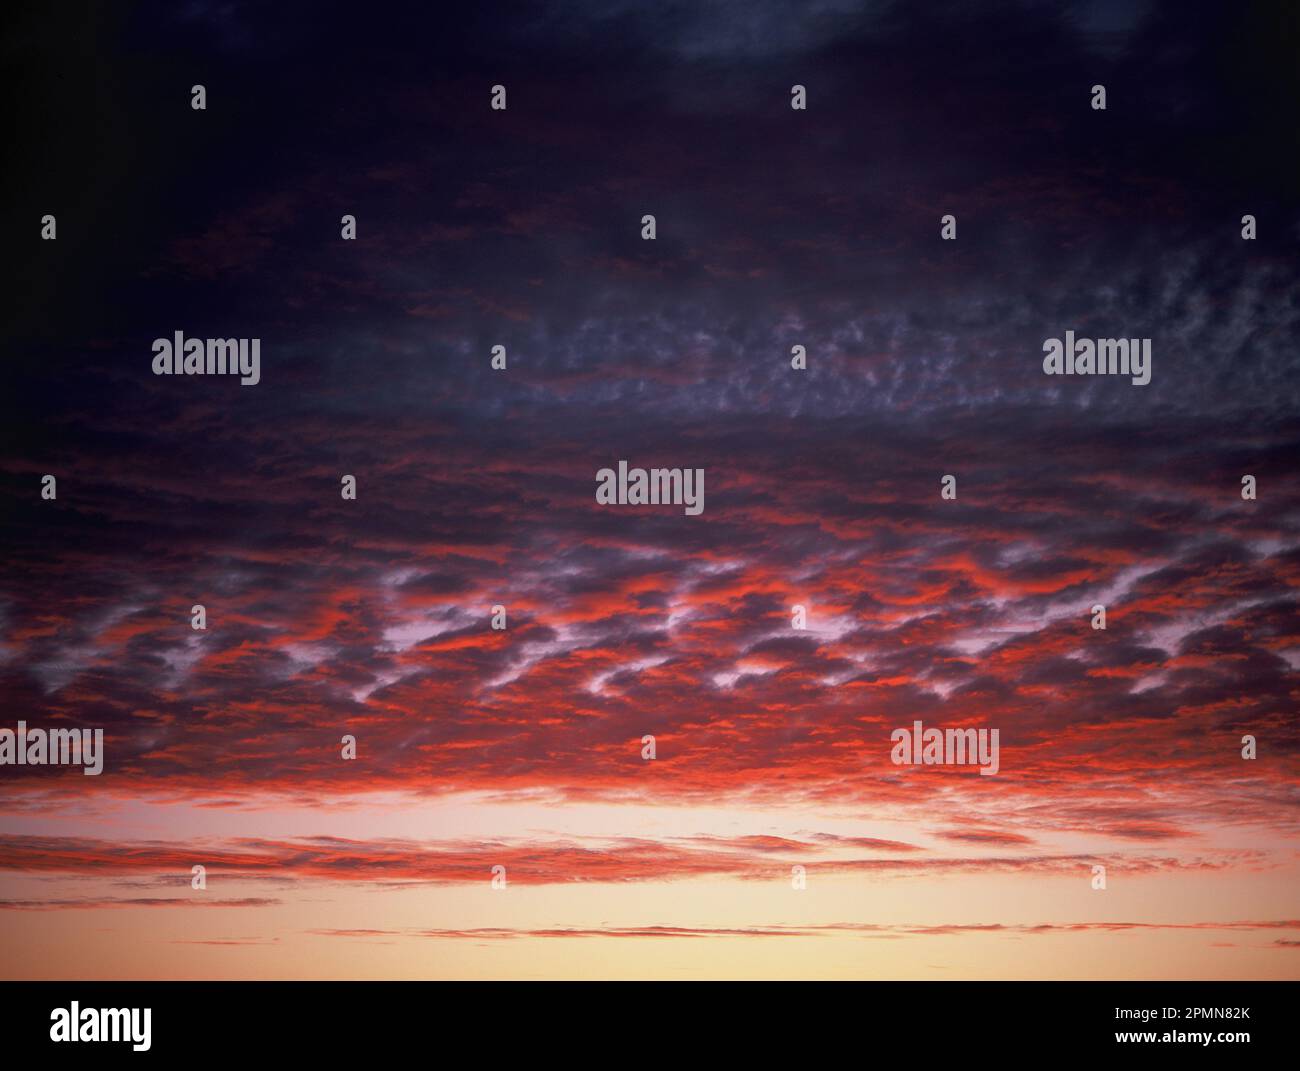 Scenic. Red sky with altocumulus & stratocumulus clouds at dusk just after sunset. Stock Photo